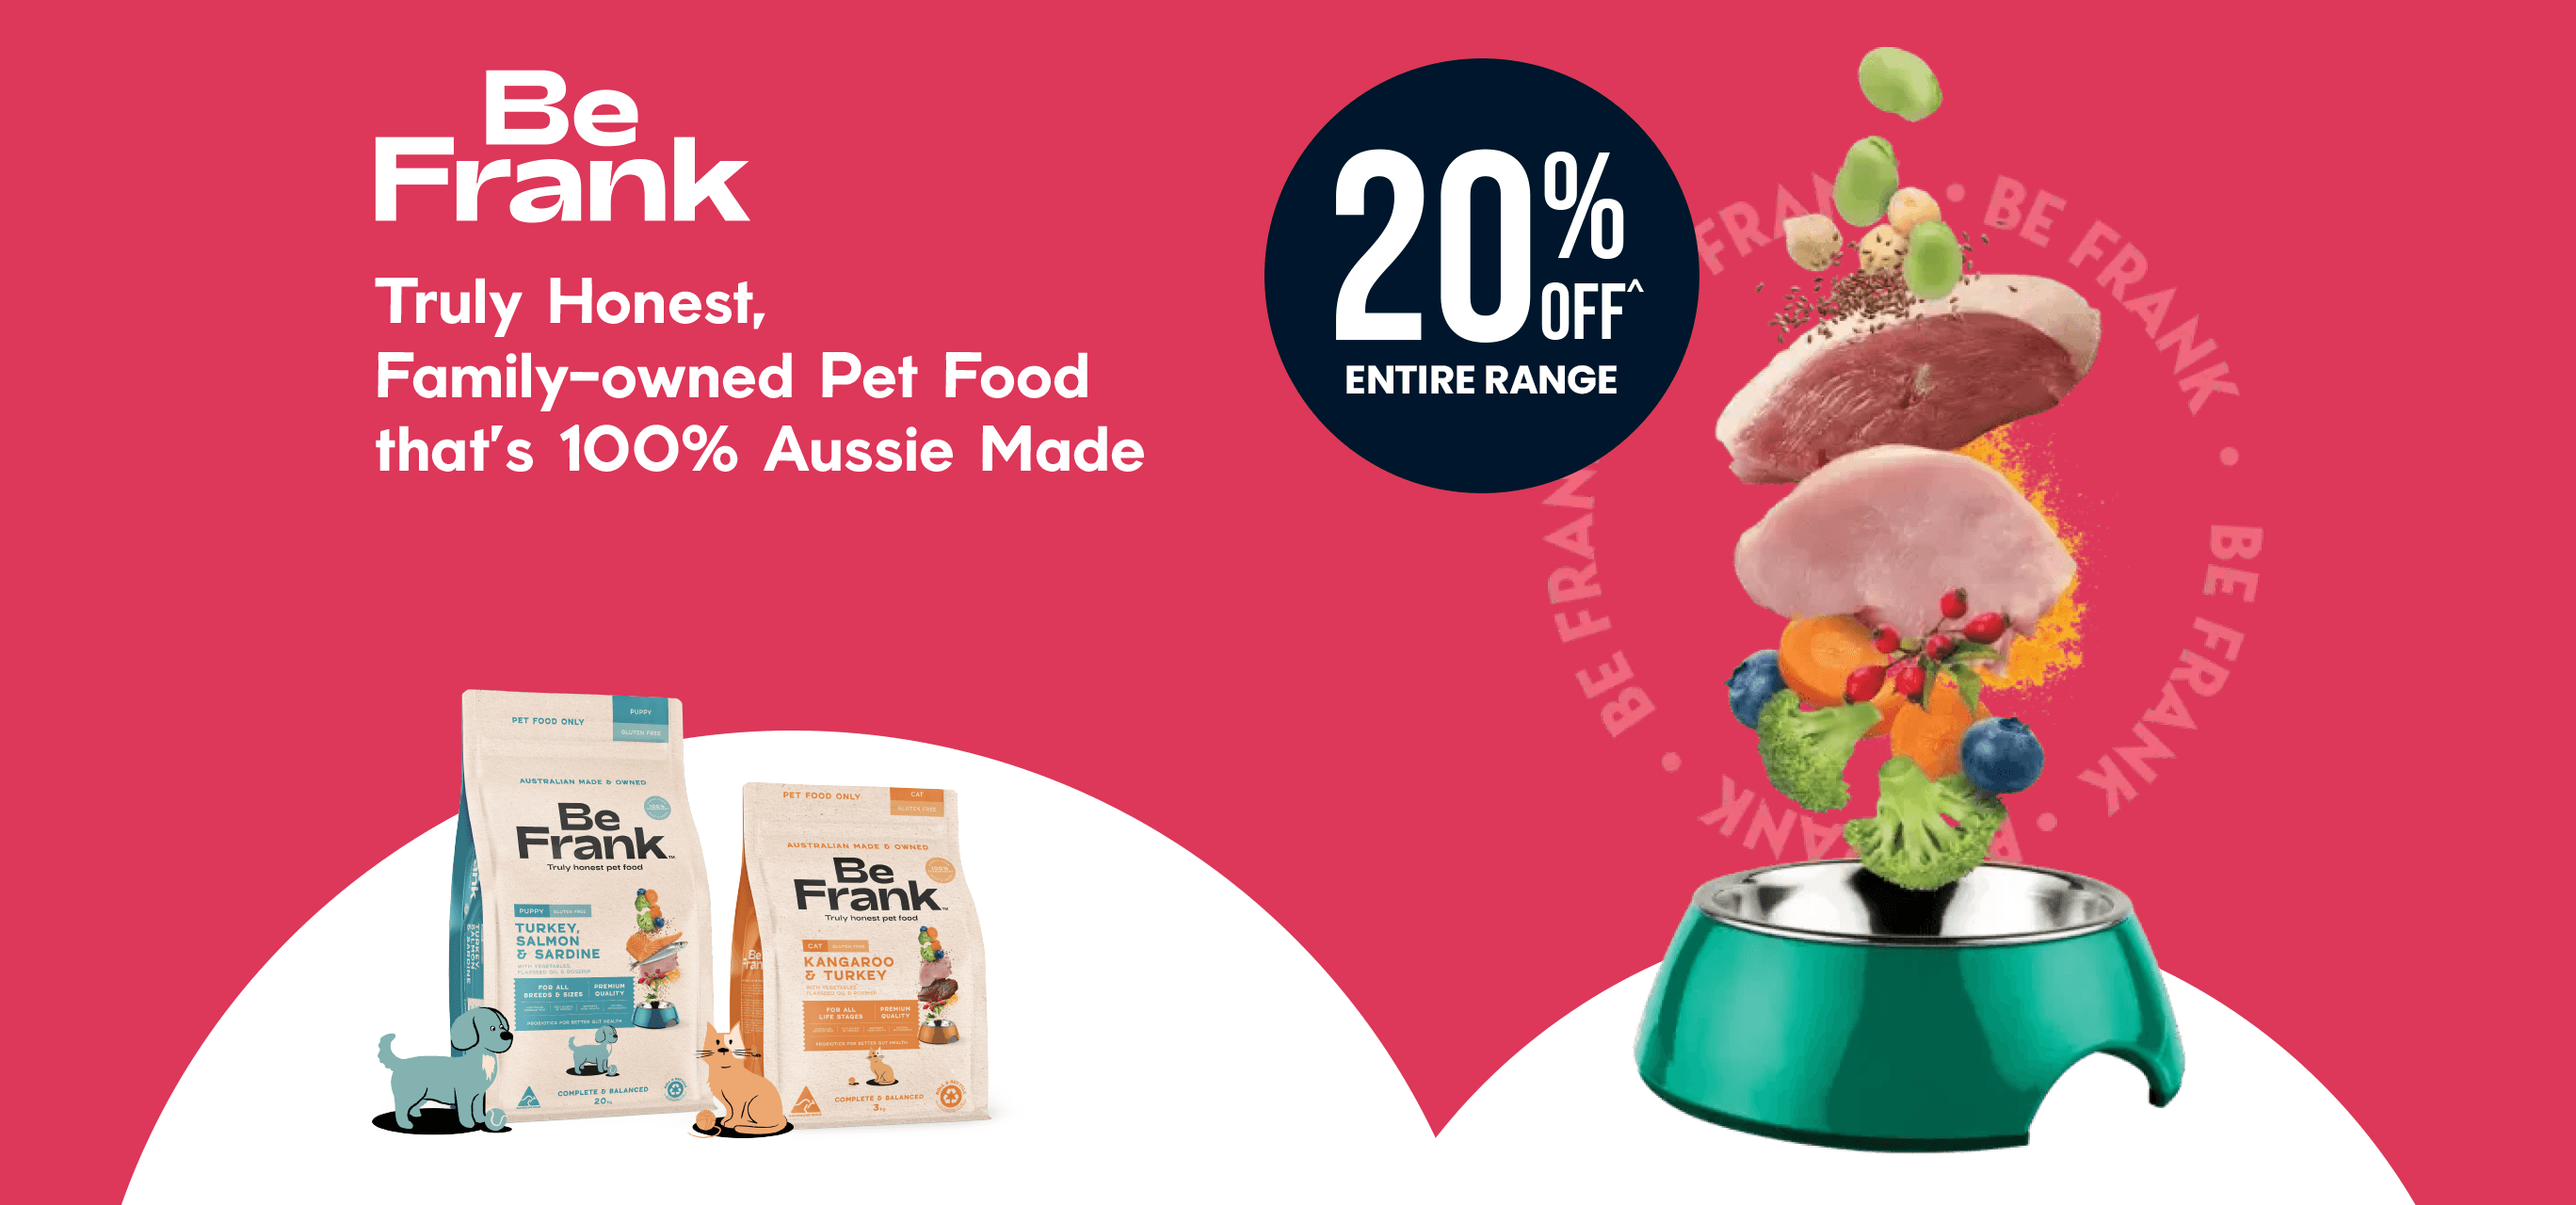 Be Frank - Truly Honest, Family-owned Pet Food that’s 100% Aussie Made - 20% OFF Entire Range